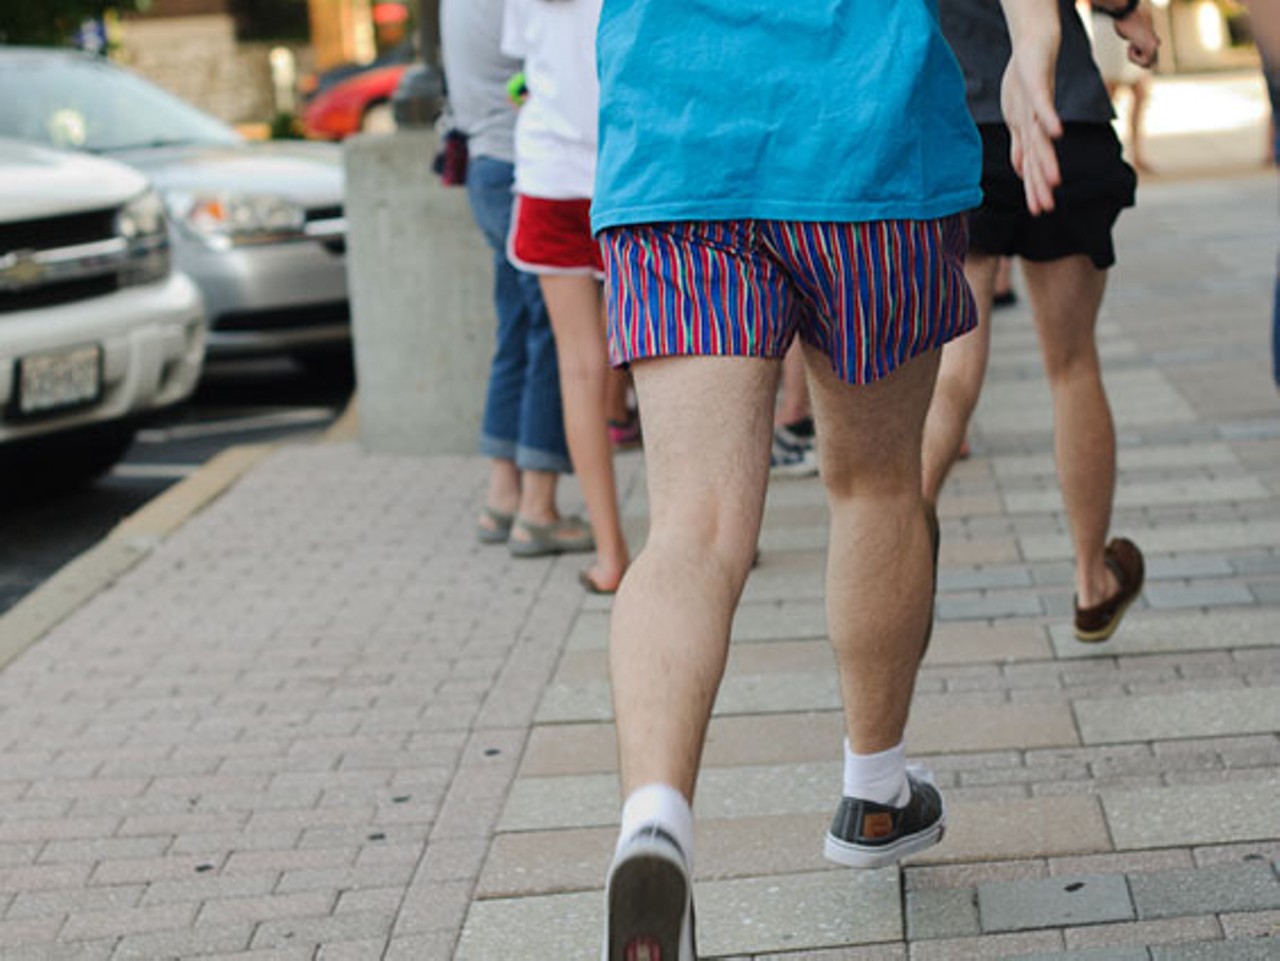 These gentlemen were awarded the honorary "Shortiest Short-Shorts" award. Or rather, they should have been.